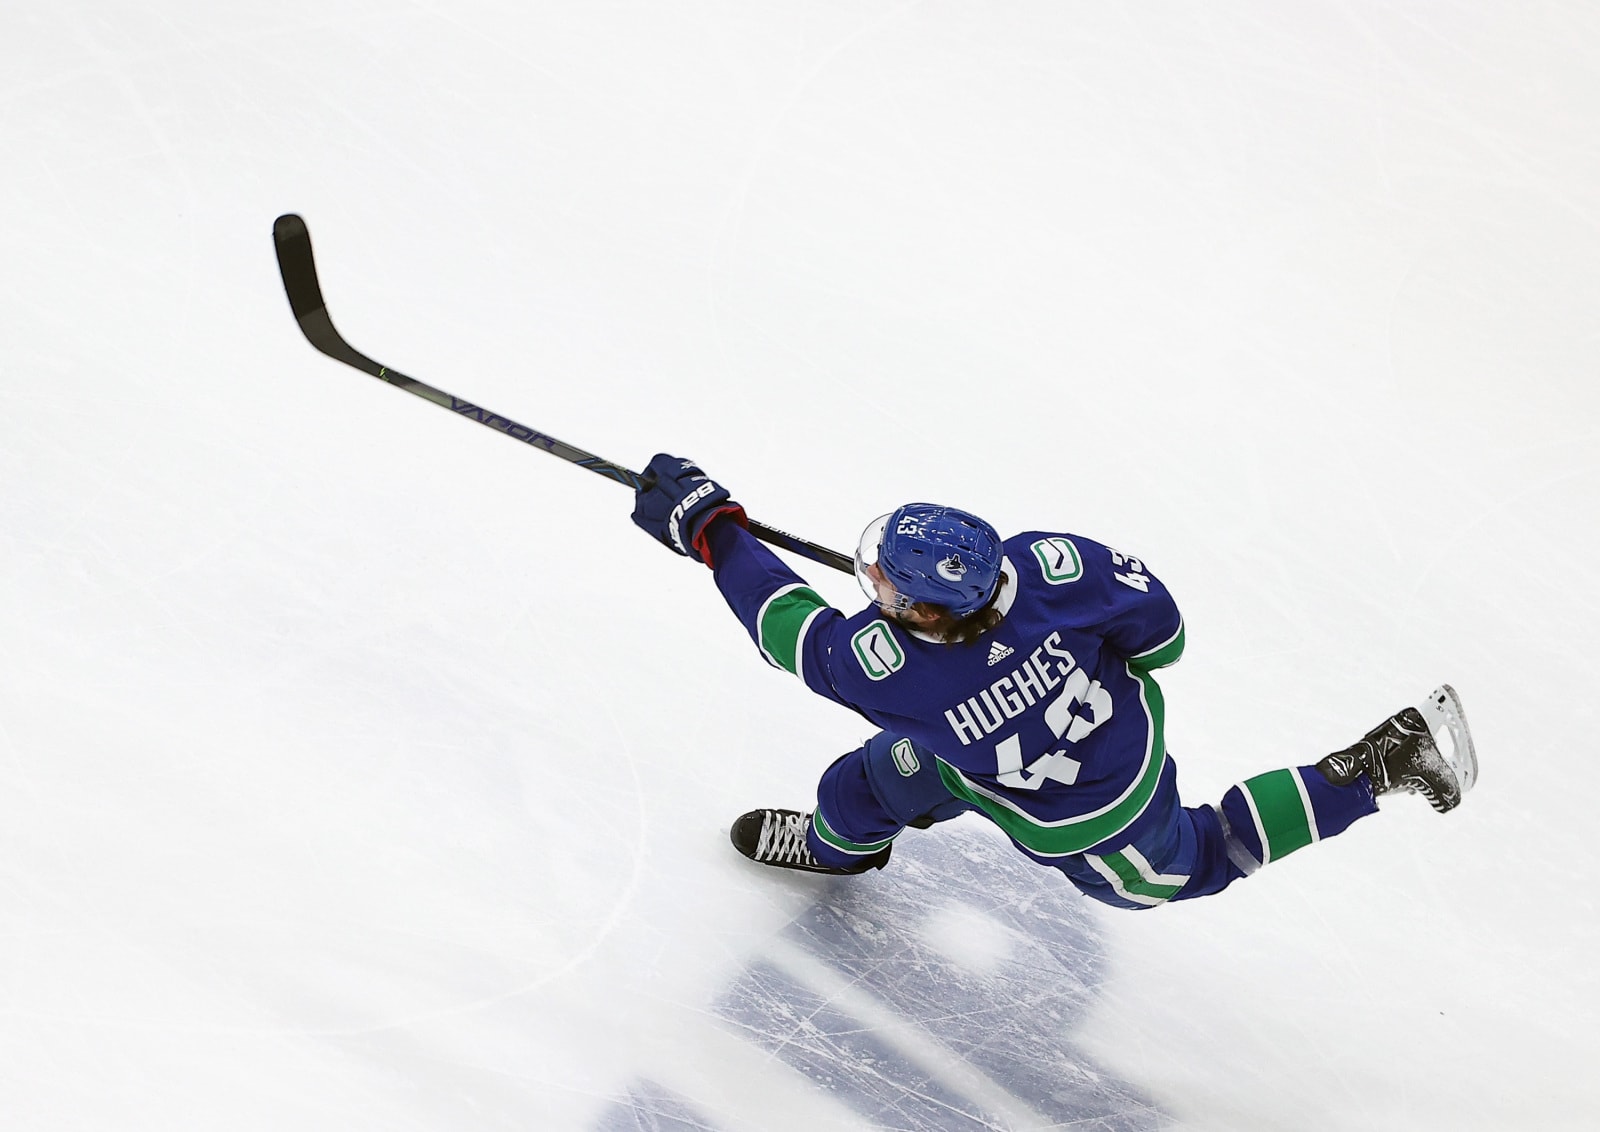 Thatcher Demko of the Vancouver Canucks sports a retro Canucks jersey  News Photo - Getty Images